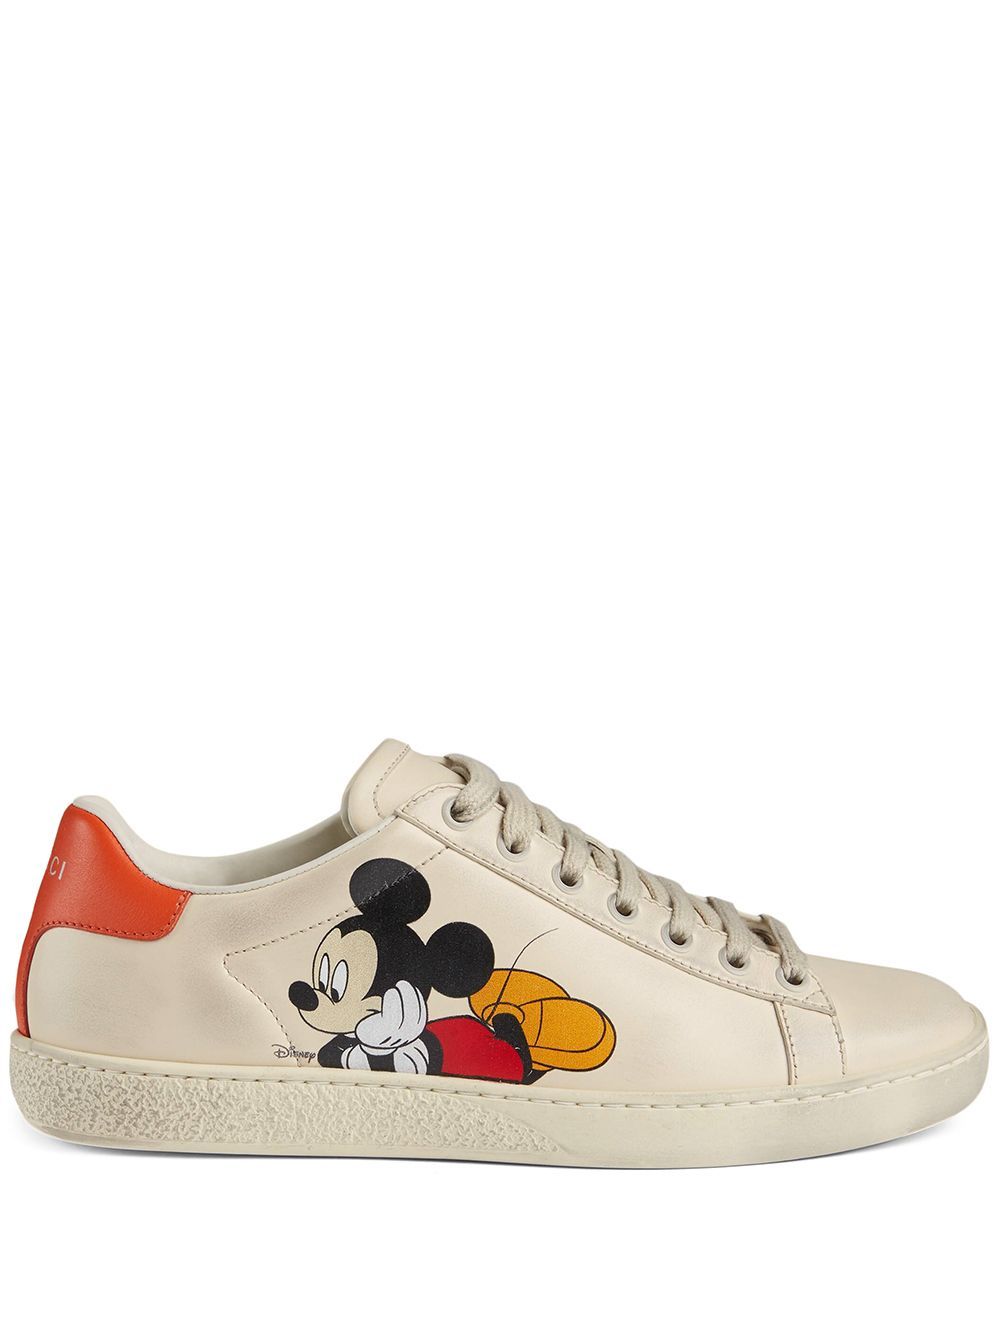 Gucci x Disney Mickey Mouse Sneakers. Mickey mouse shoes, Sneakers, Gucci outfits